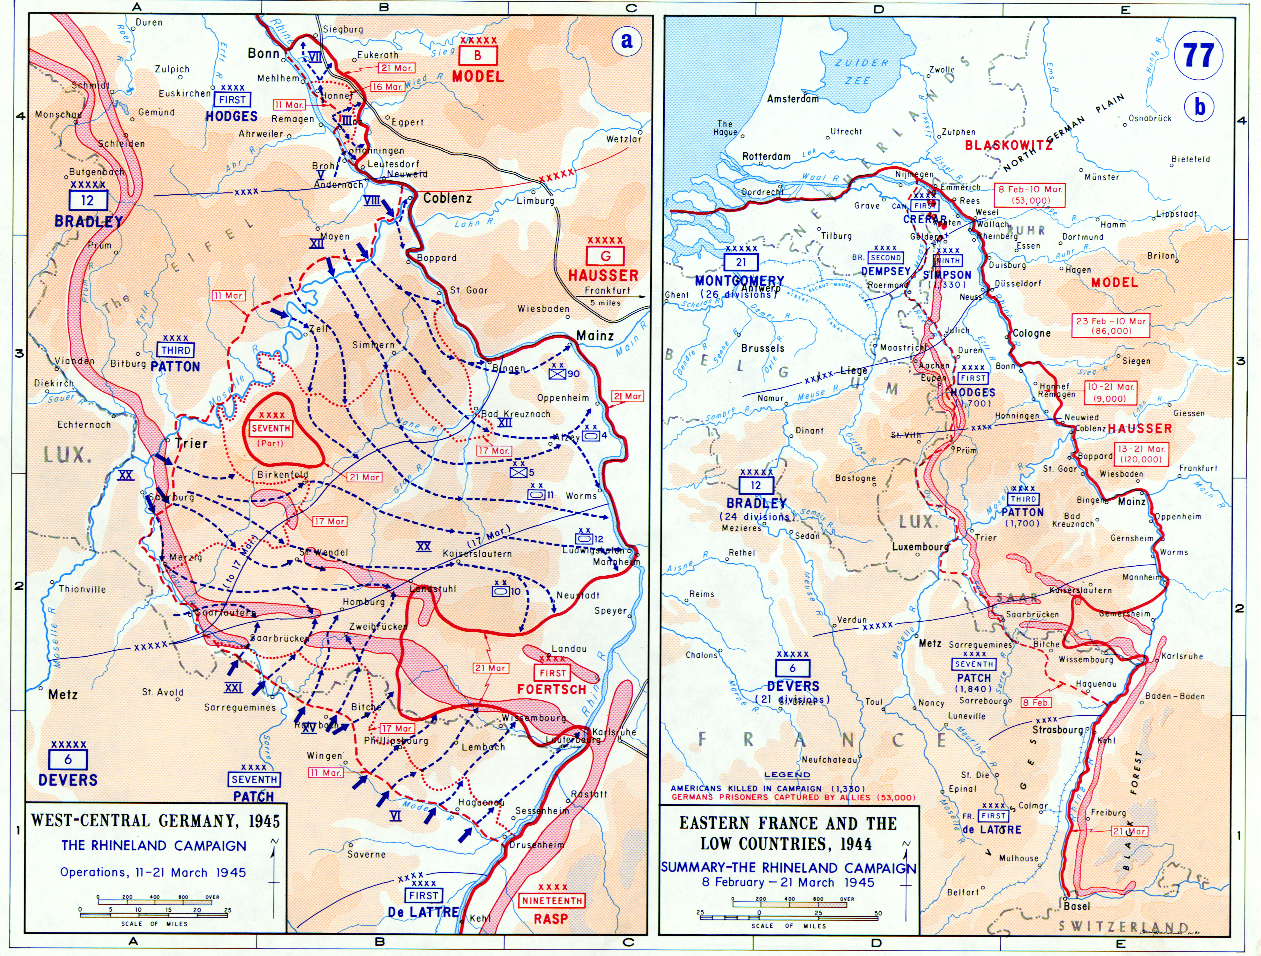 Map depicting the Allied advance to the Rhine River in West-Central Germany, Eastern France, and the Low Countries, 8 Feb-21 Mar 1945